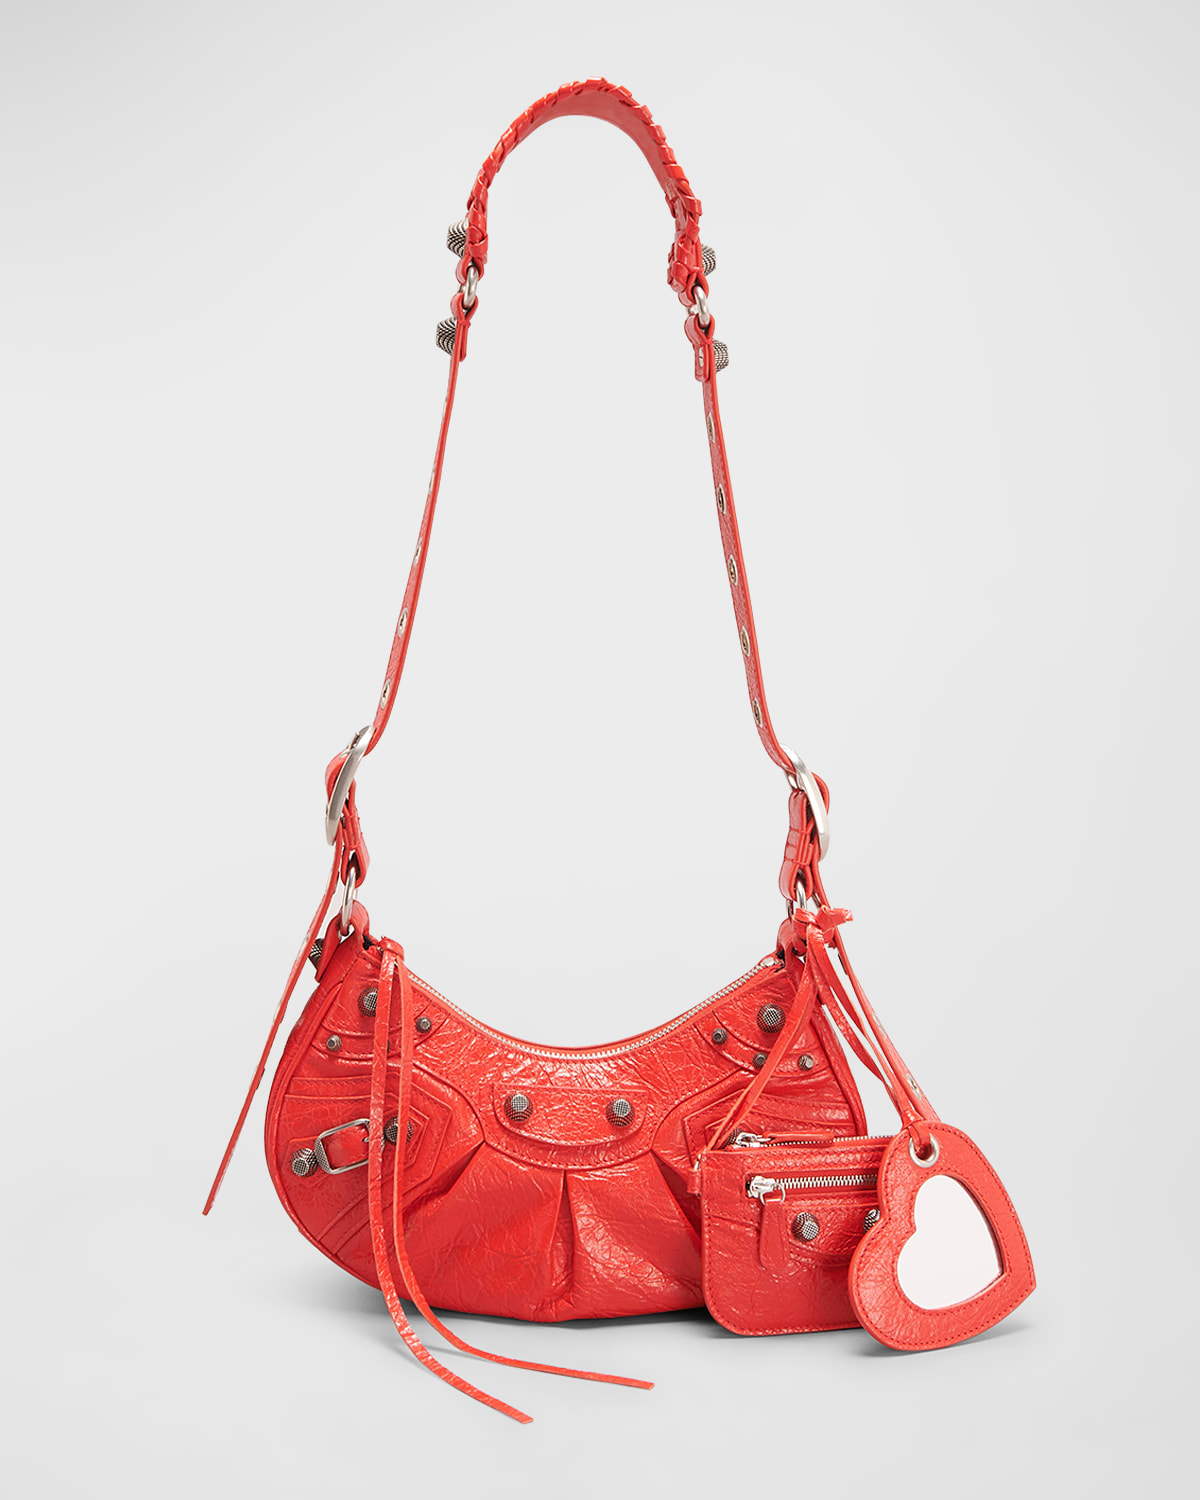 Balenciaga Cagole Xs Studded Leather Shoulder Bag In 6534 Tomato Red